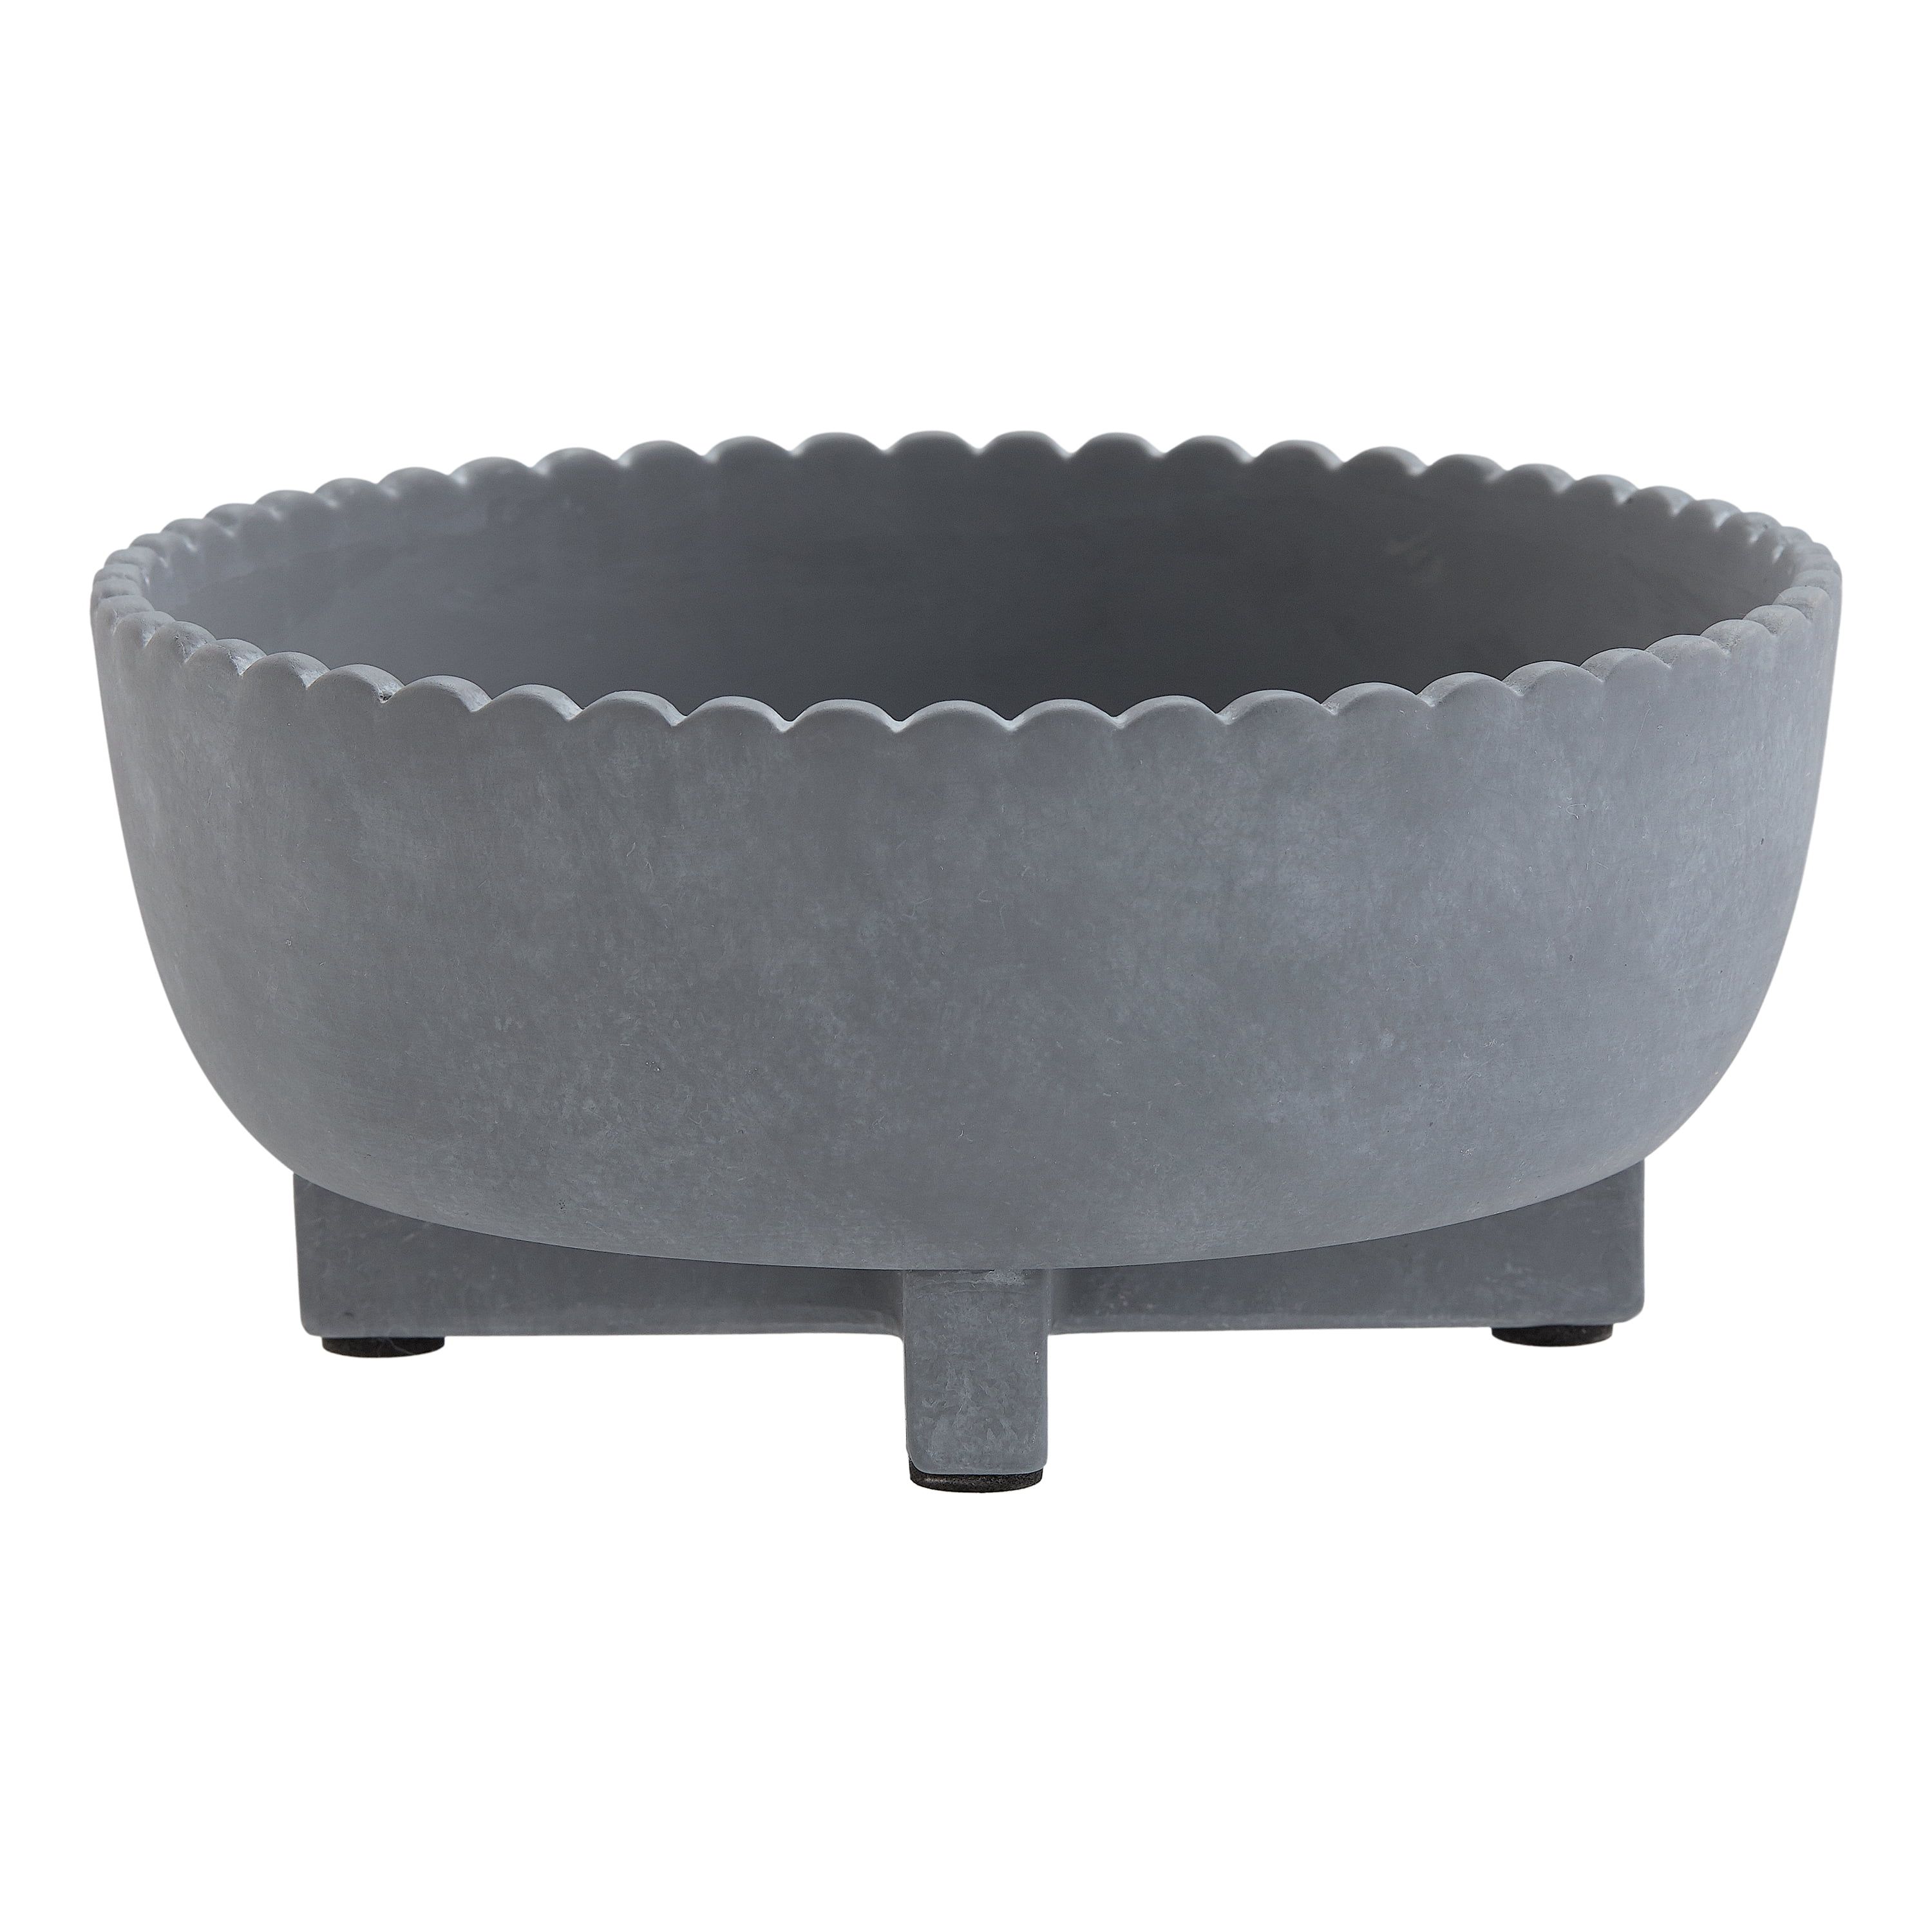 Better Homes & Gardens Pottery 8" Thalea Ceramic Scalloped Bowl with Stand, Grey | Walmart (US)